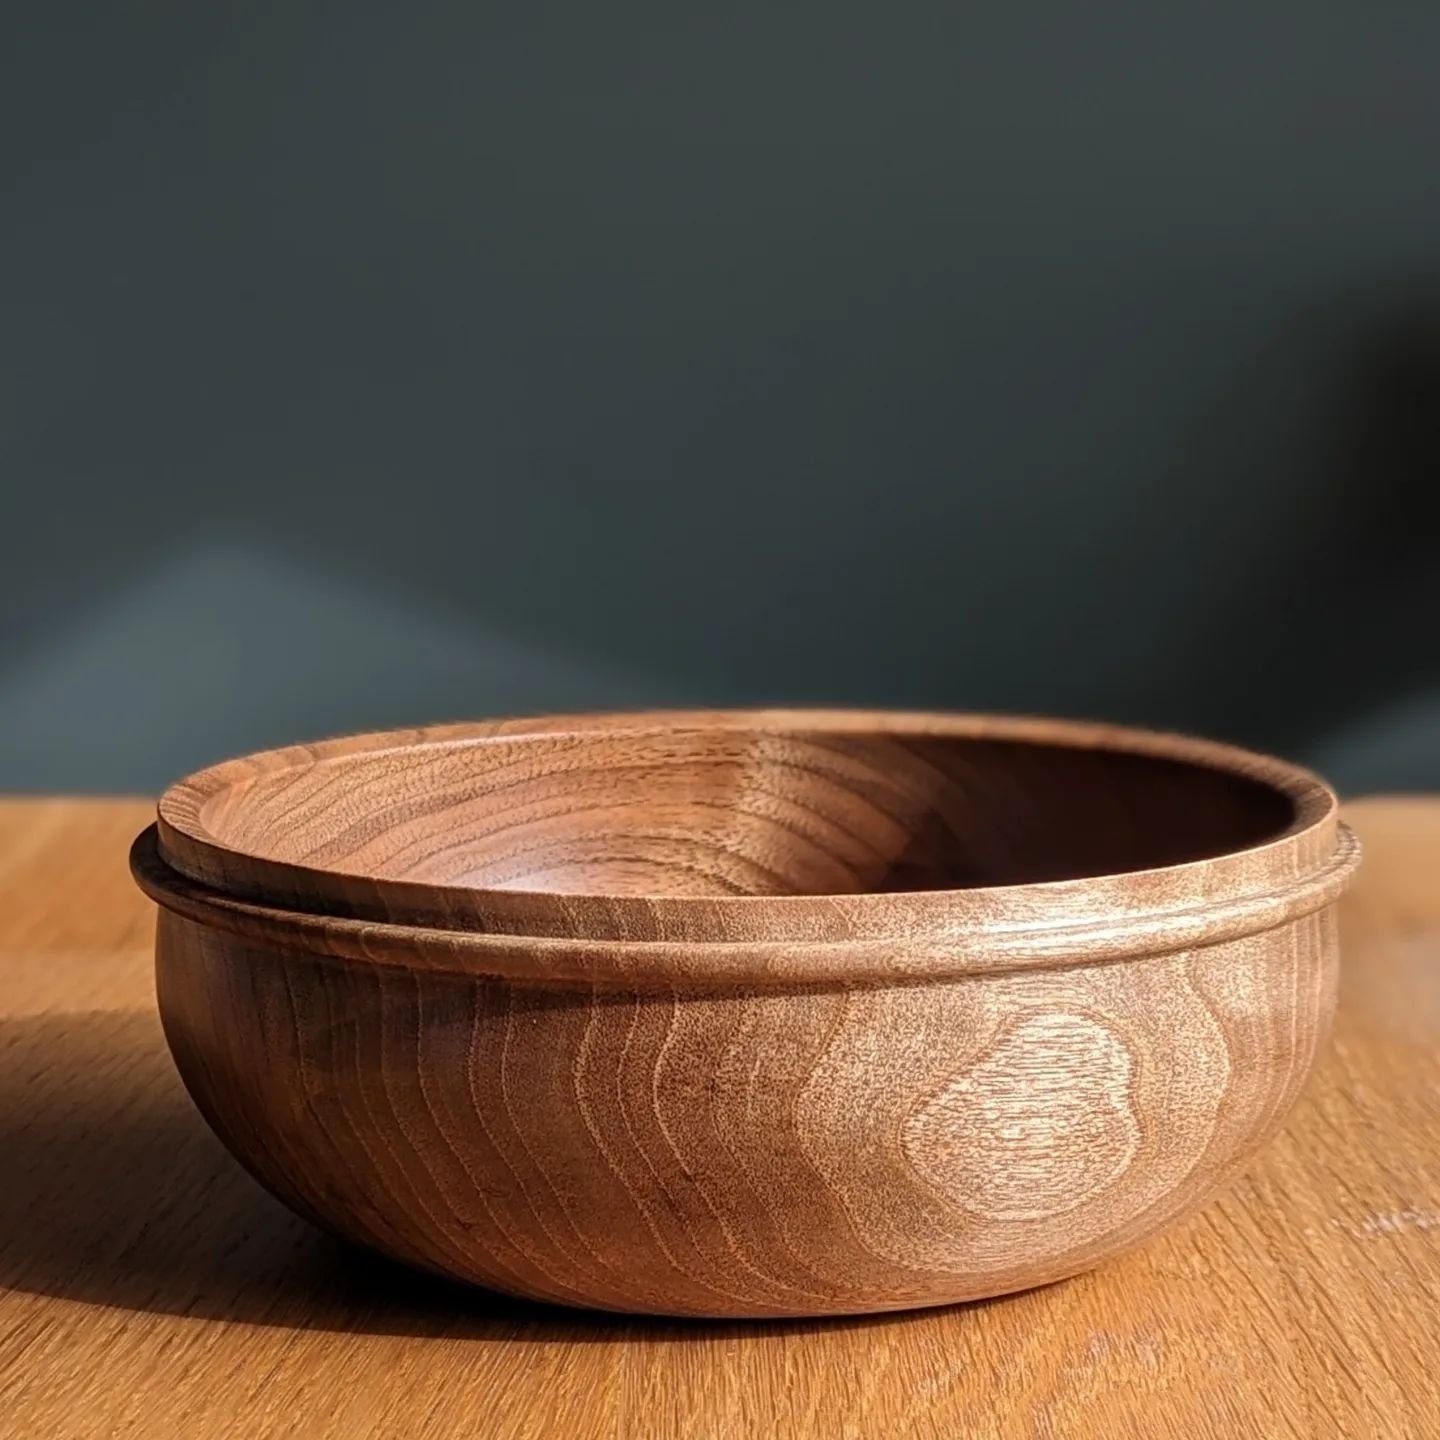 English Walnut... you sultry devil you. 

This, along with some other bowls and pots will be available for sale in @scottishdesignexchange next Wednesday - when I'll be upgrading from 1 shelf to a 3 shelf unit.